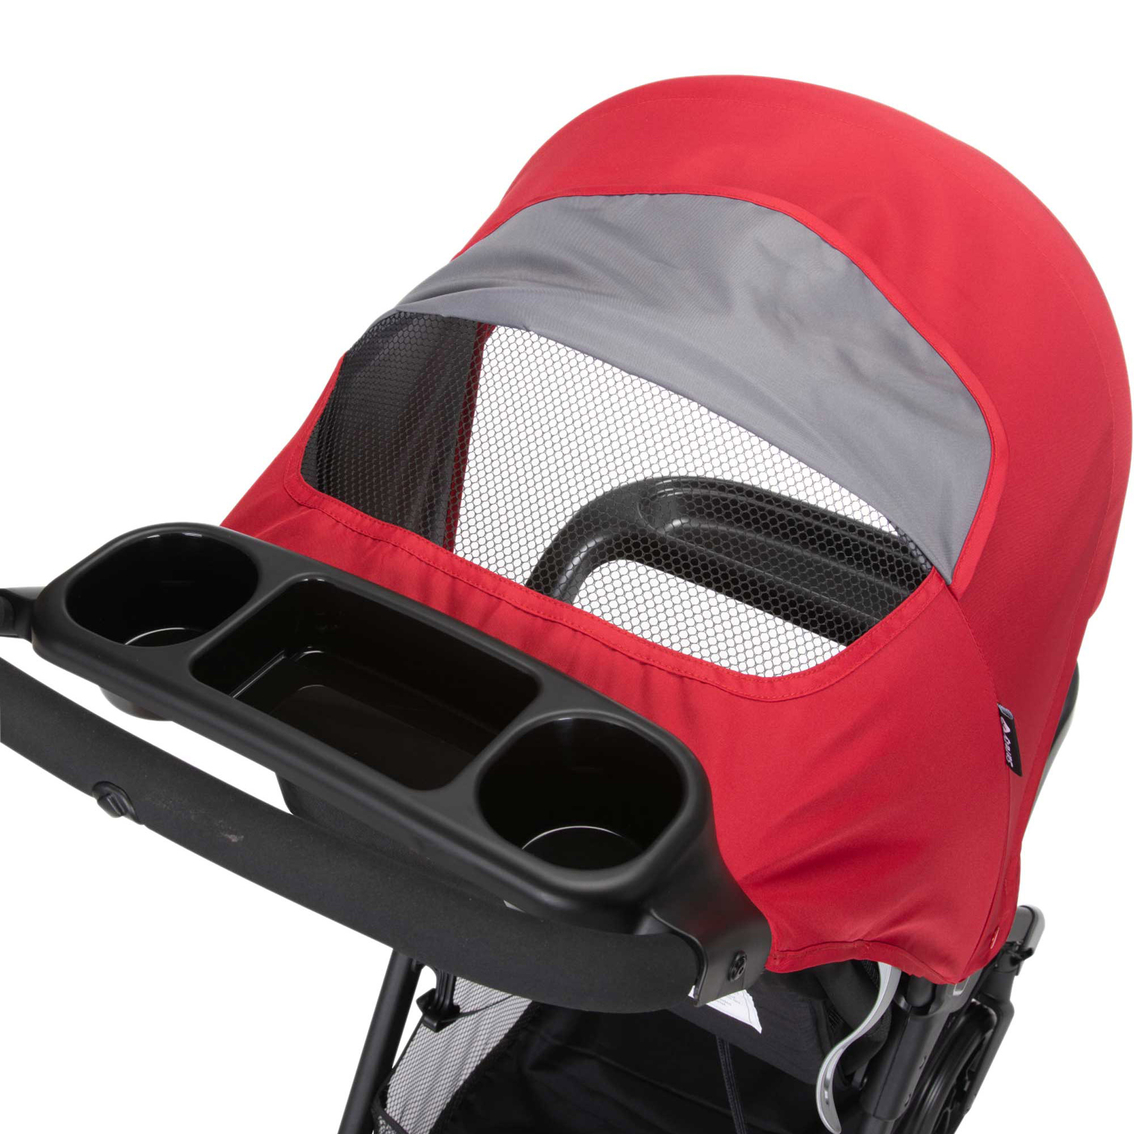 Safety 1st Smooth Ride Travel System Stroller and Infant Car Seat - Image 10 of 10